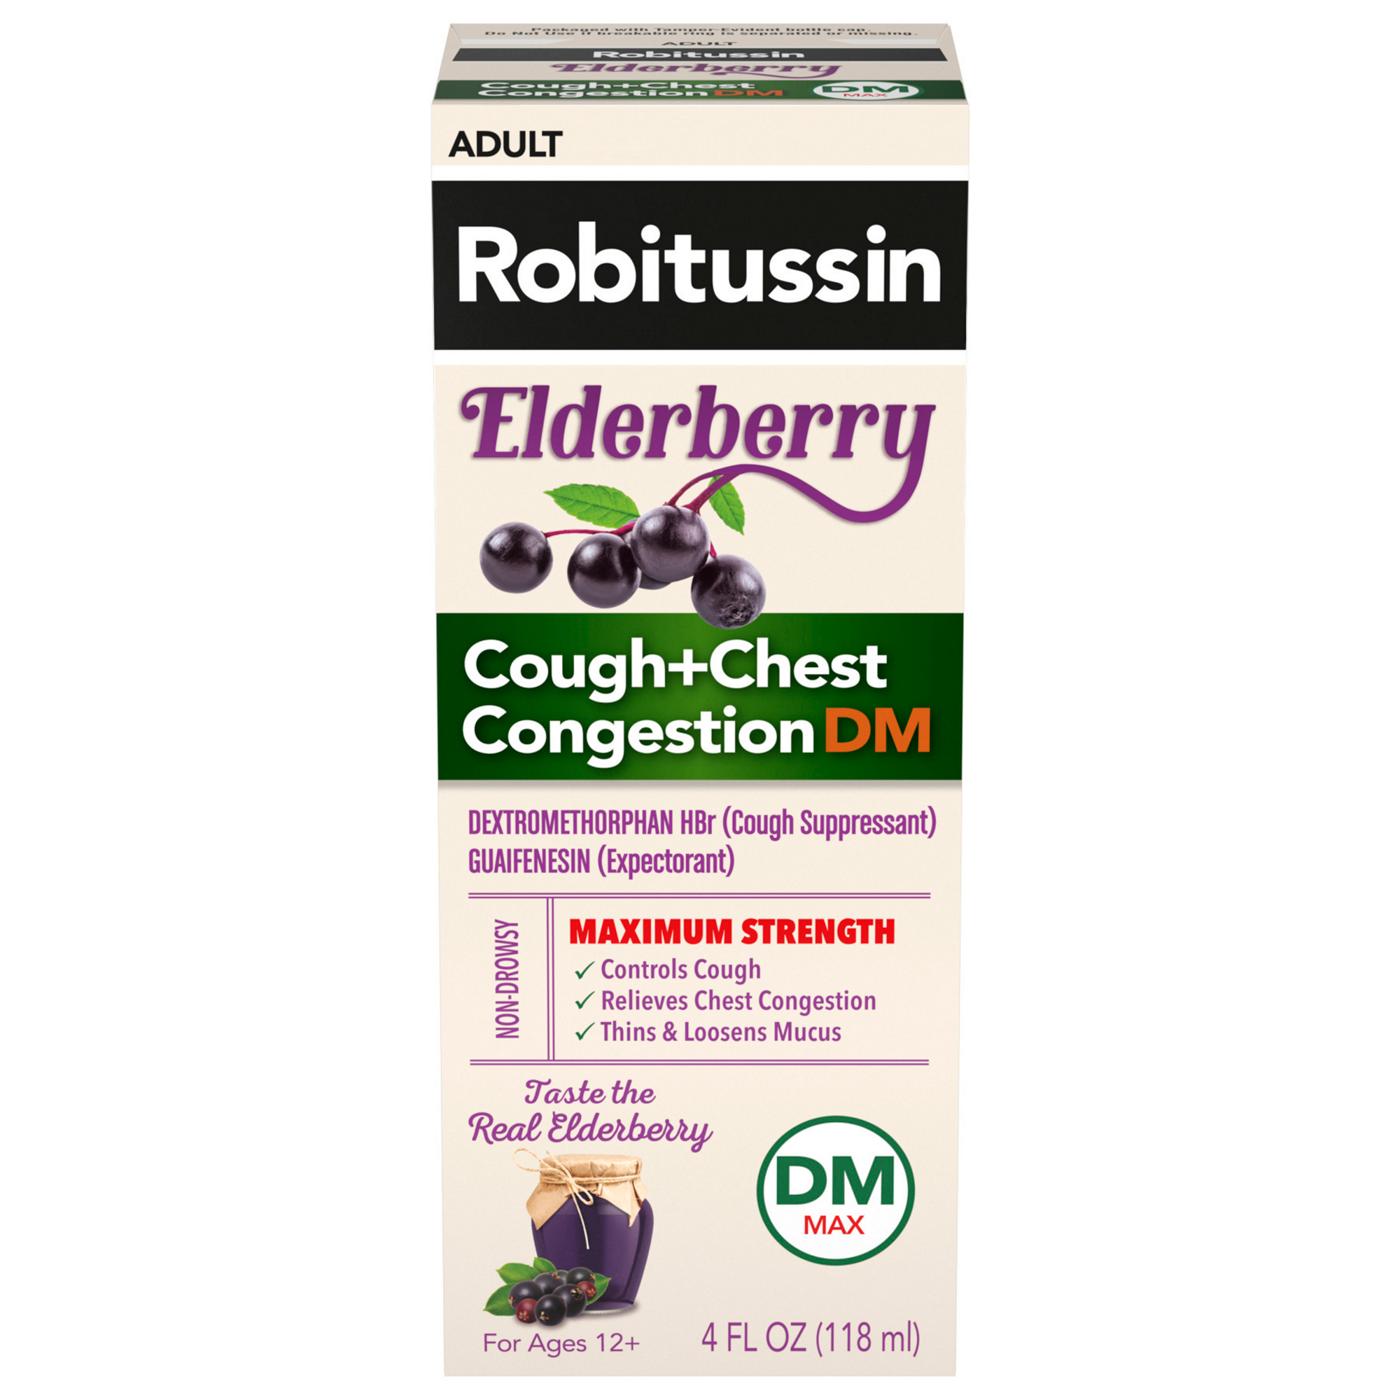 Robitussin Elderberry Cough + Chest Congestion DM Syrup; image 1 of 8